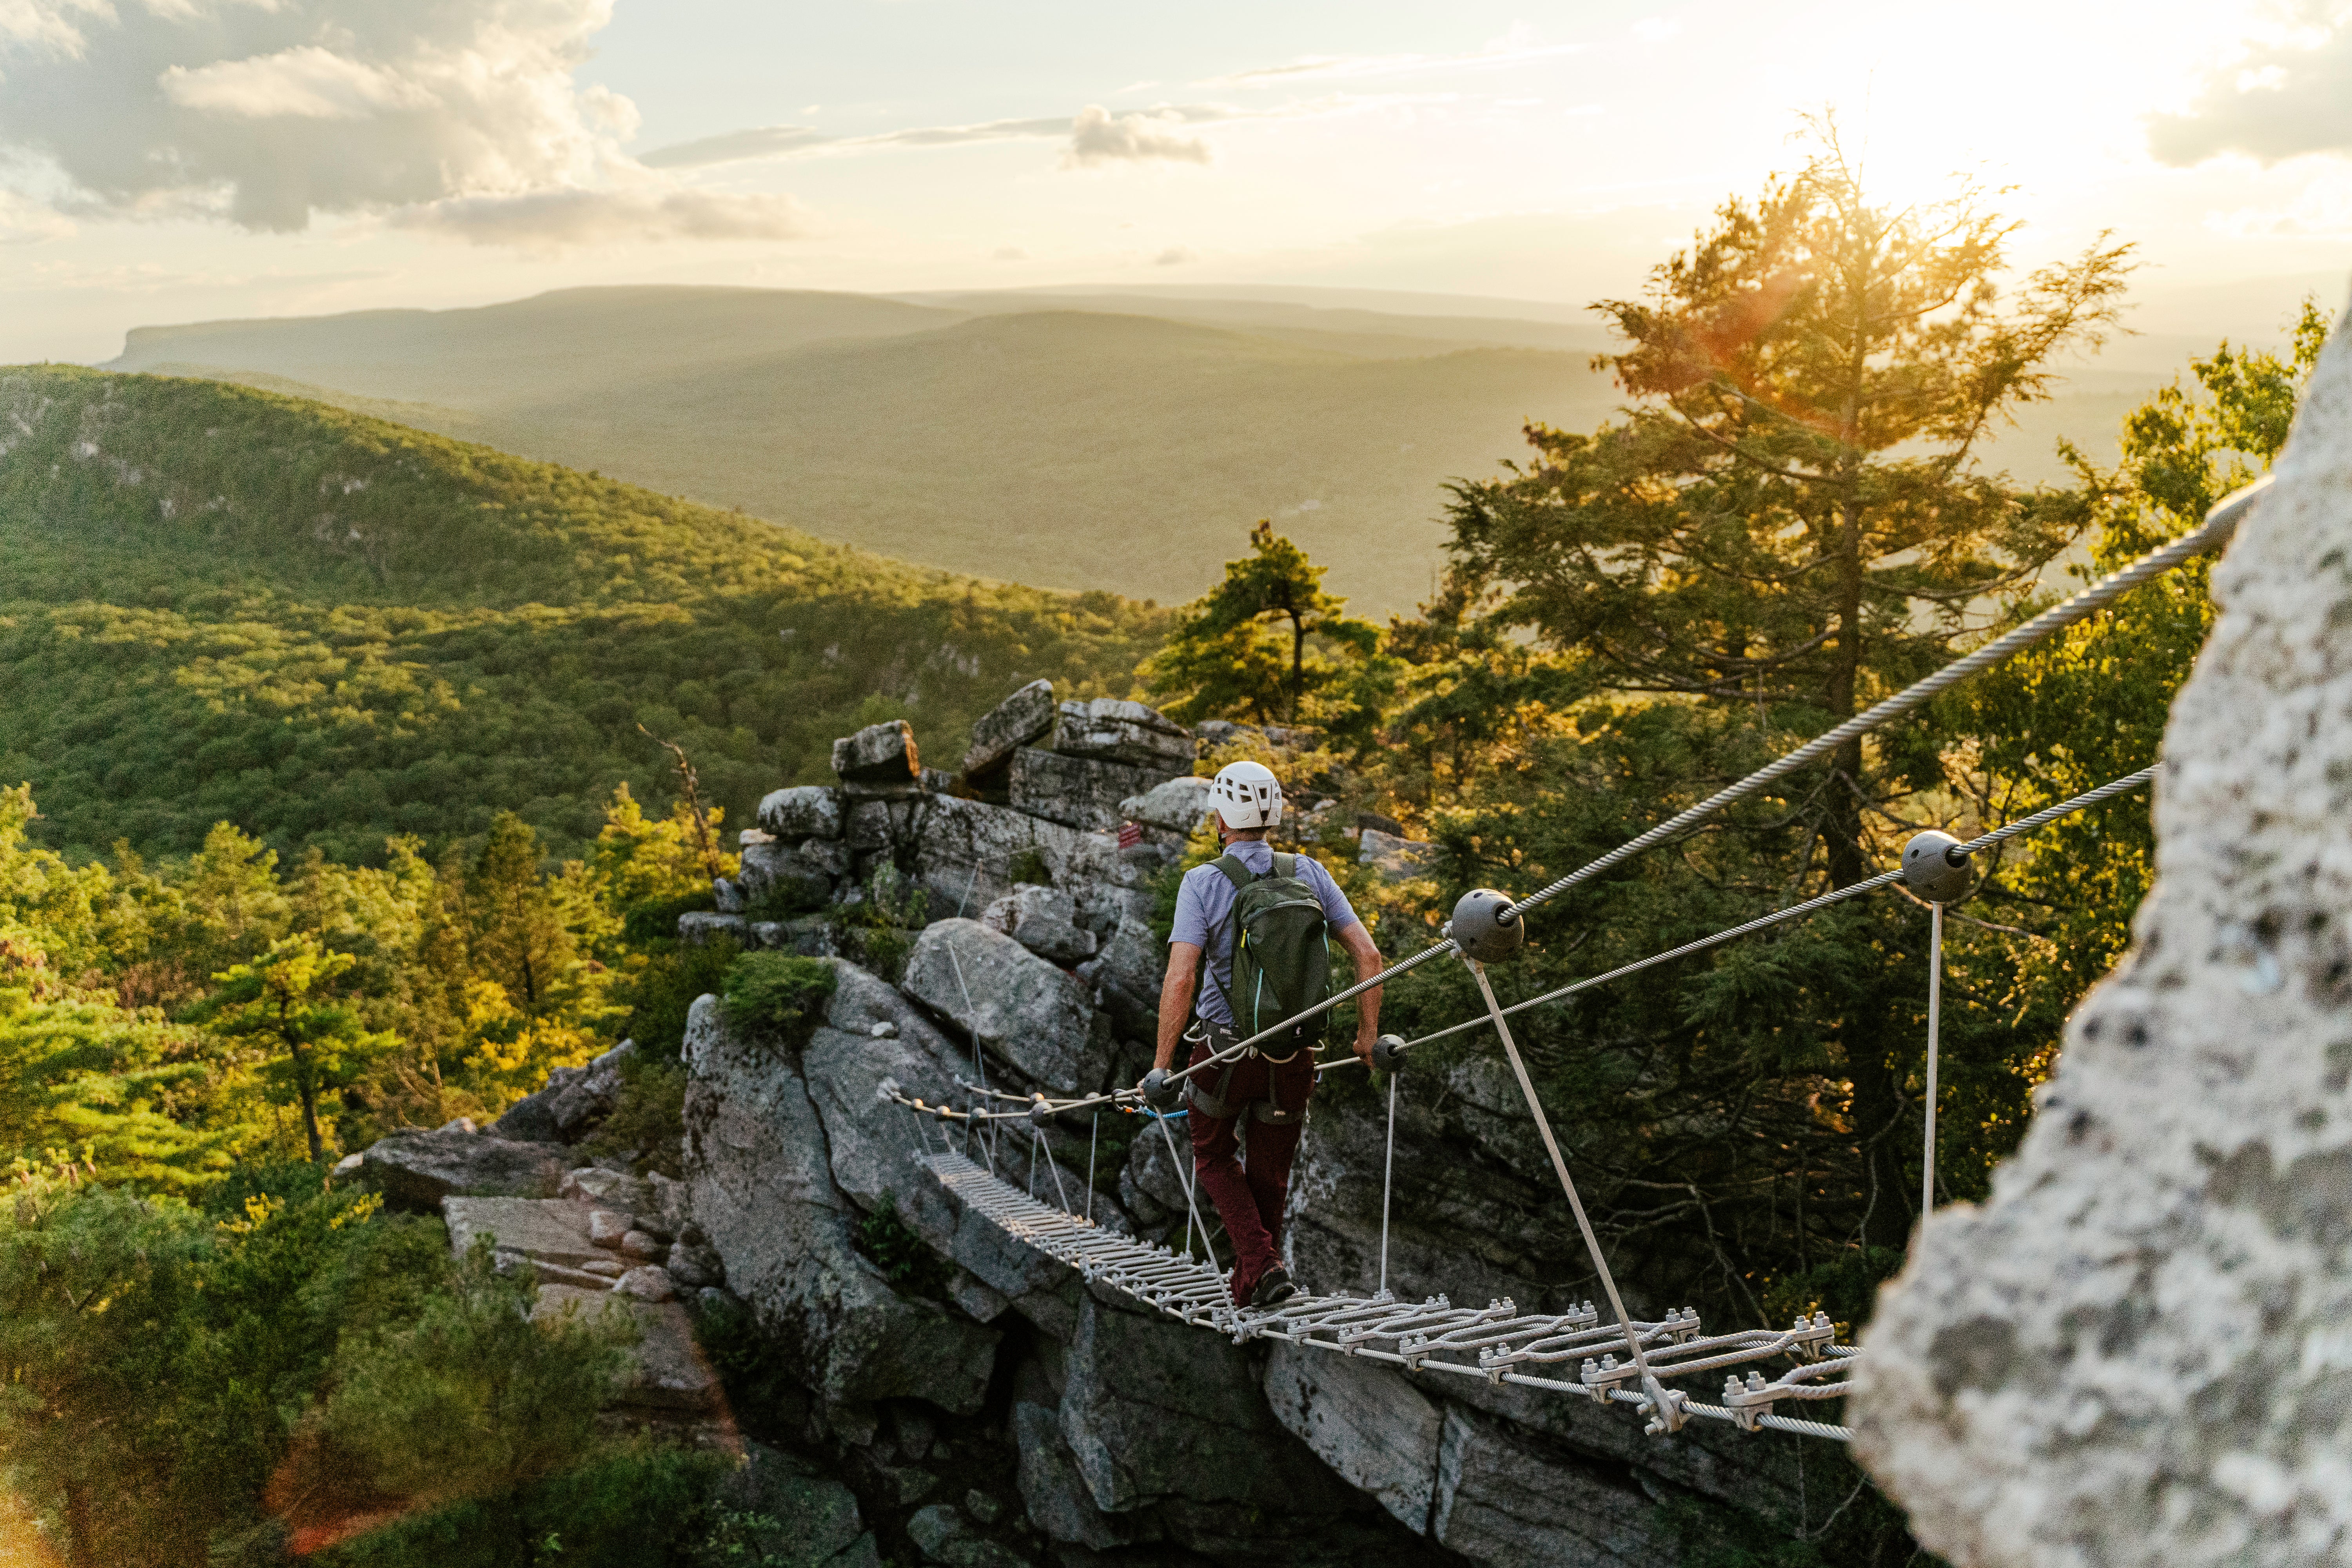 Visitors can enjoy a bird’s eye view of the Catskills from the Mohonk Mountain House via ferrata